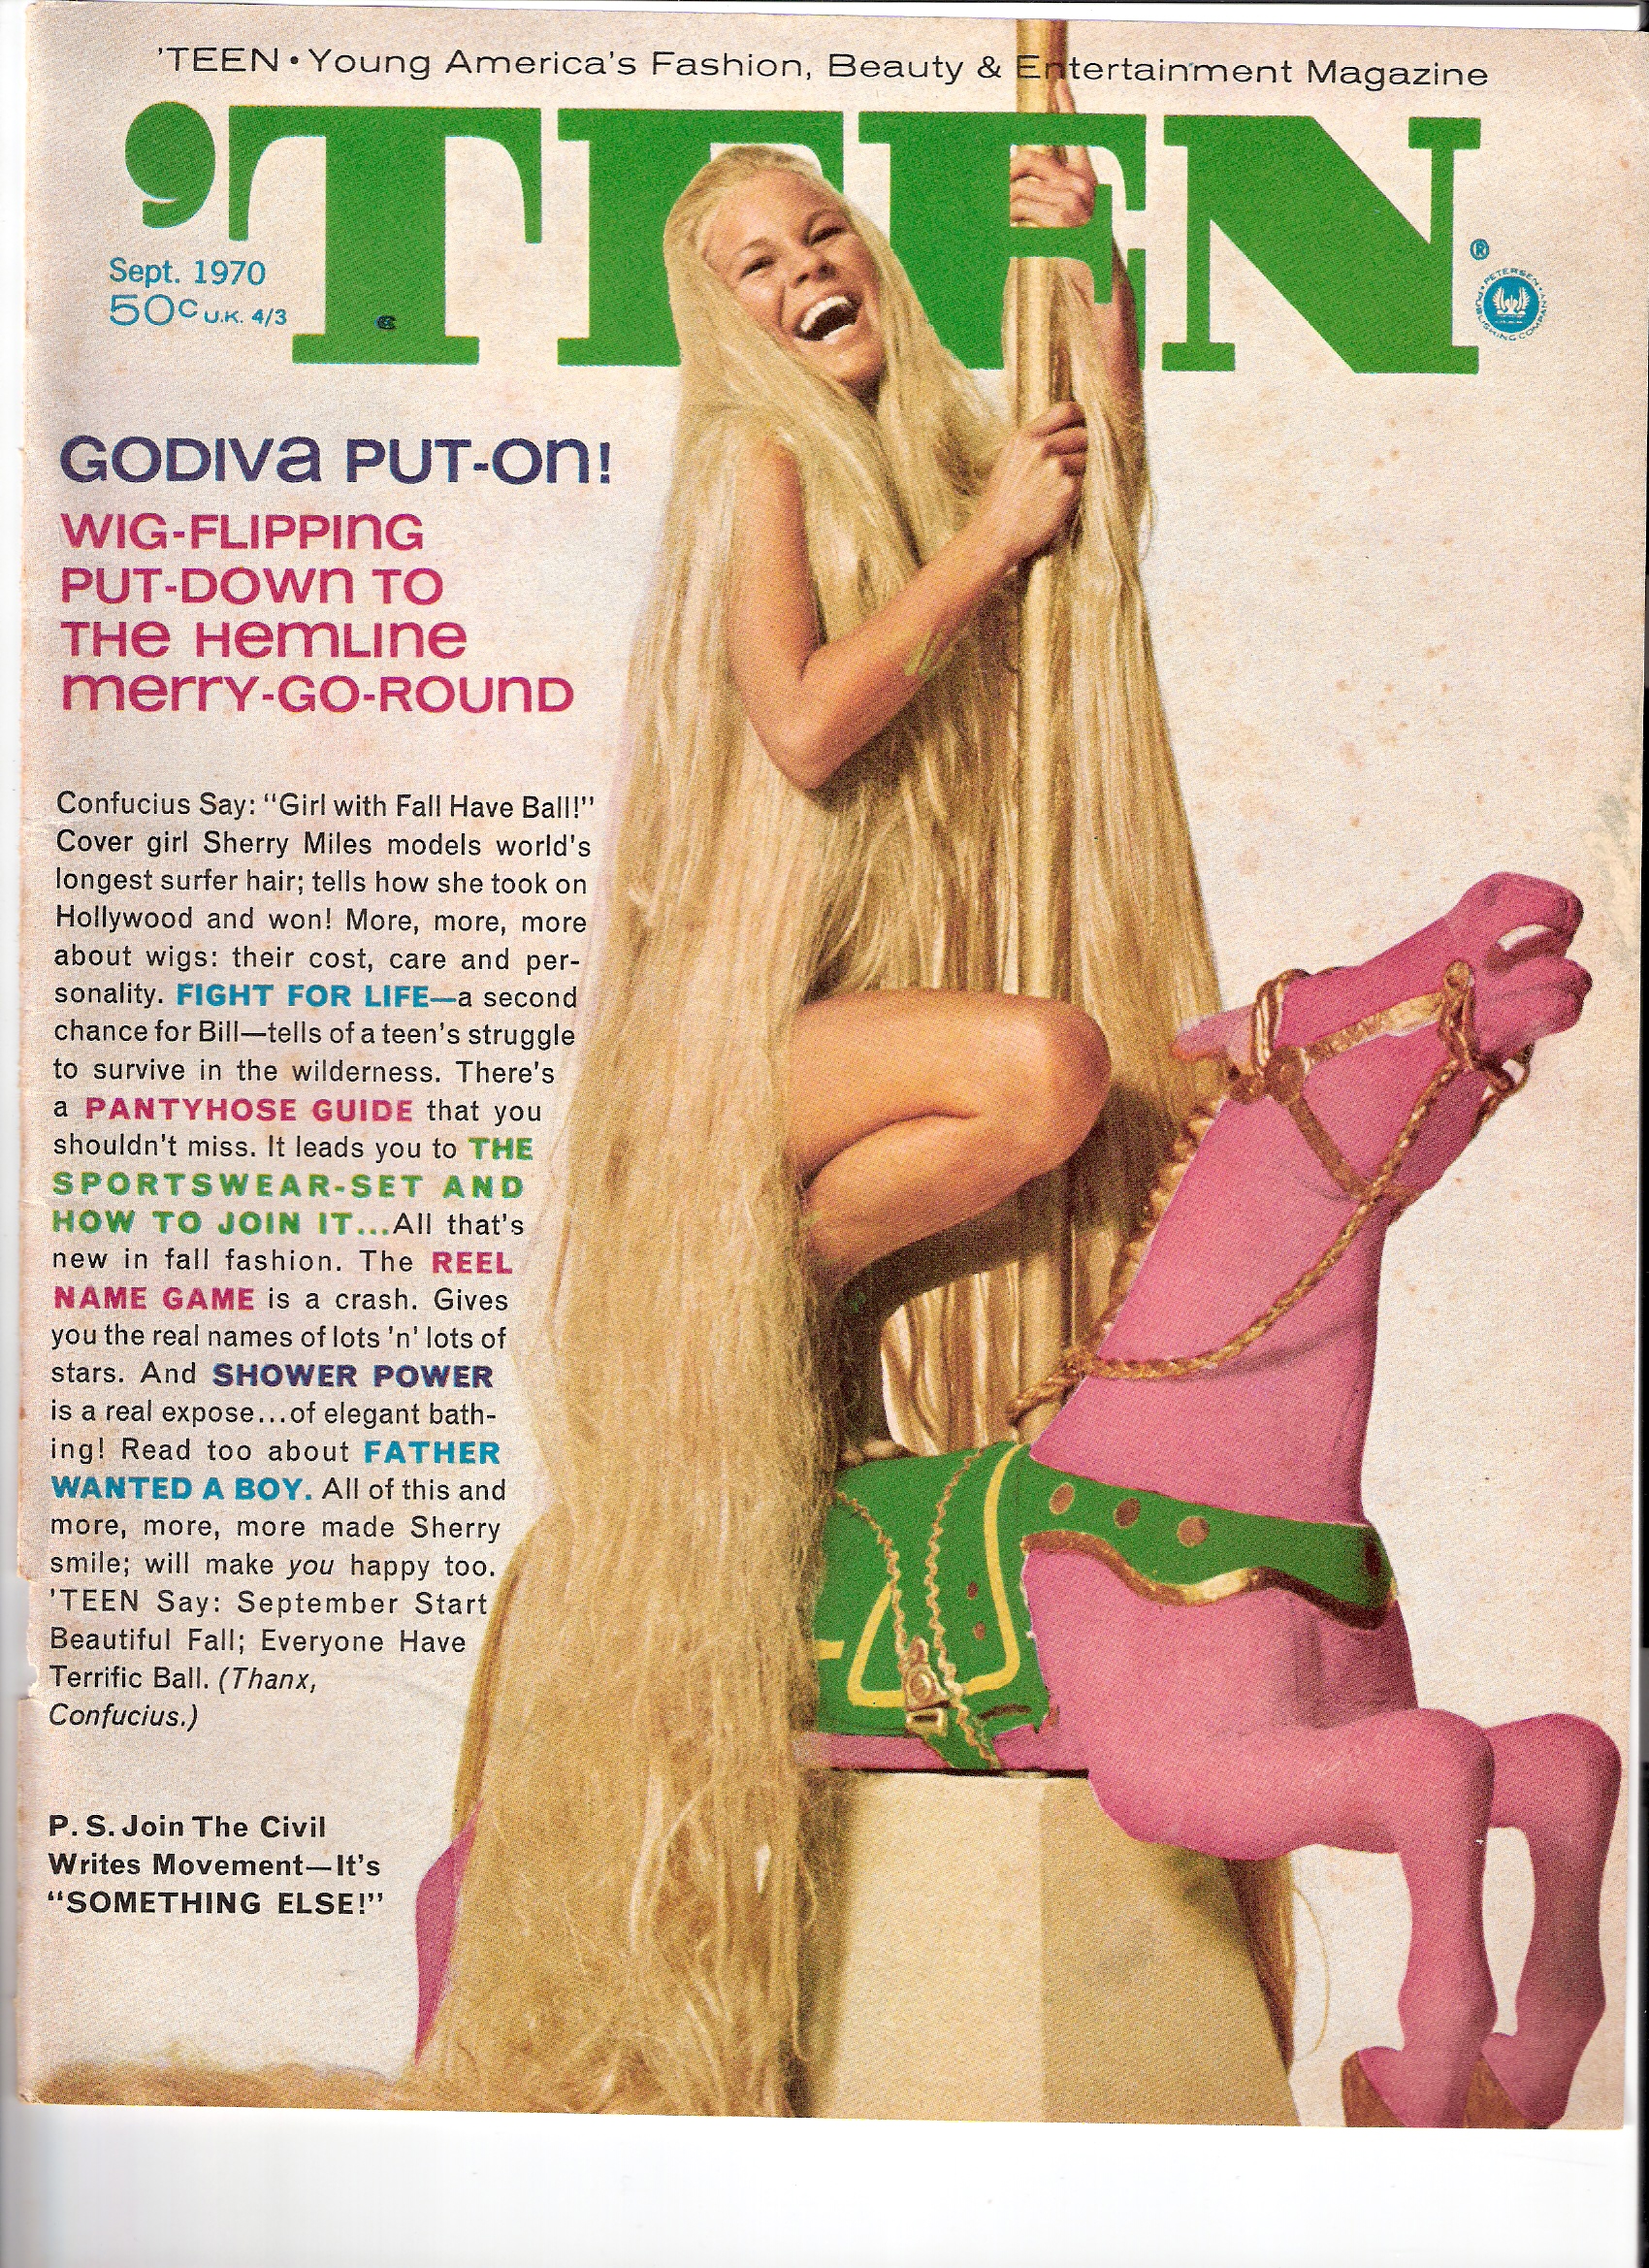 Teen Magazine Cover 1972.Ninteen photos and six page feature story.